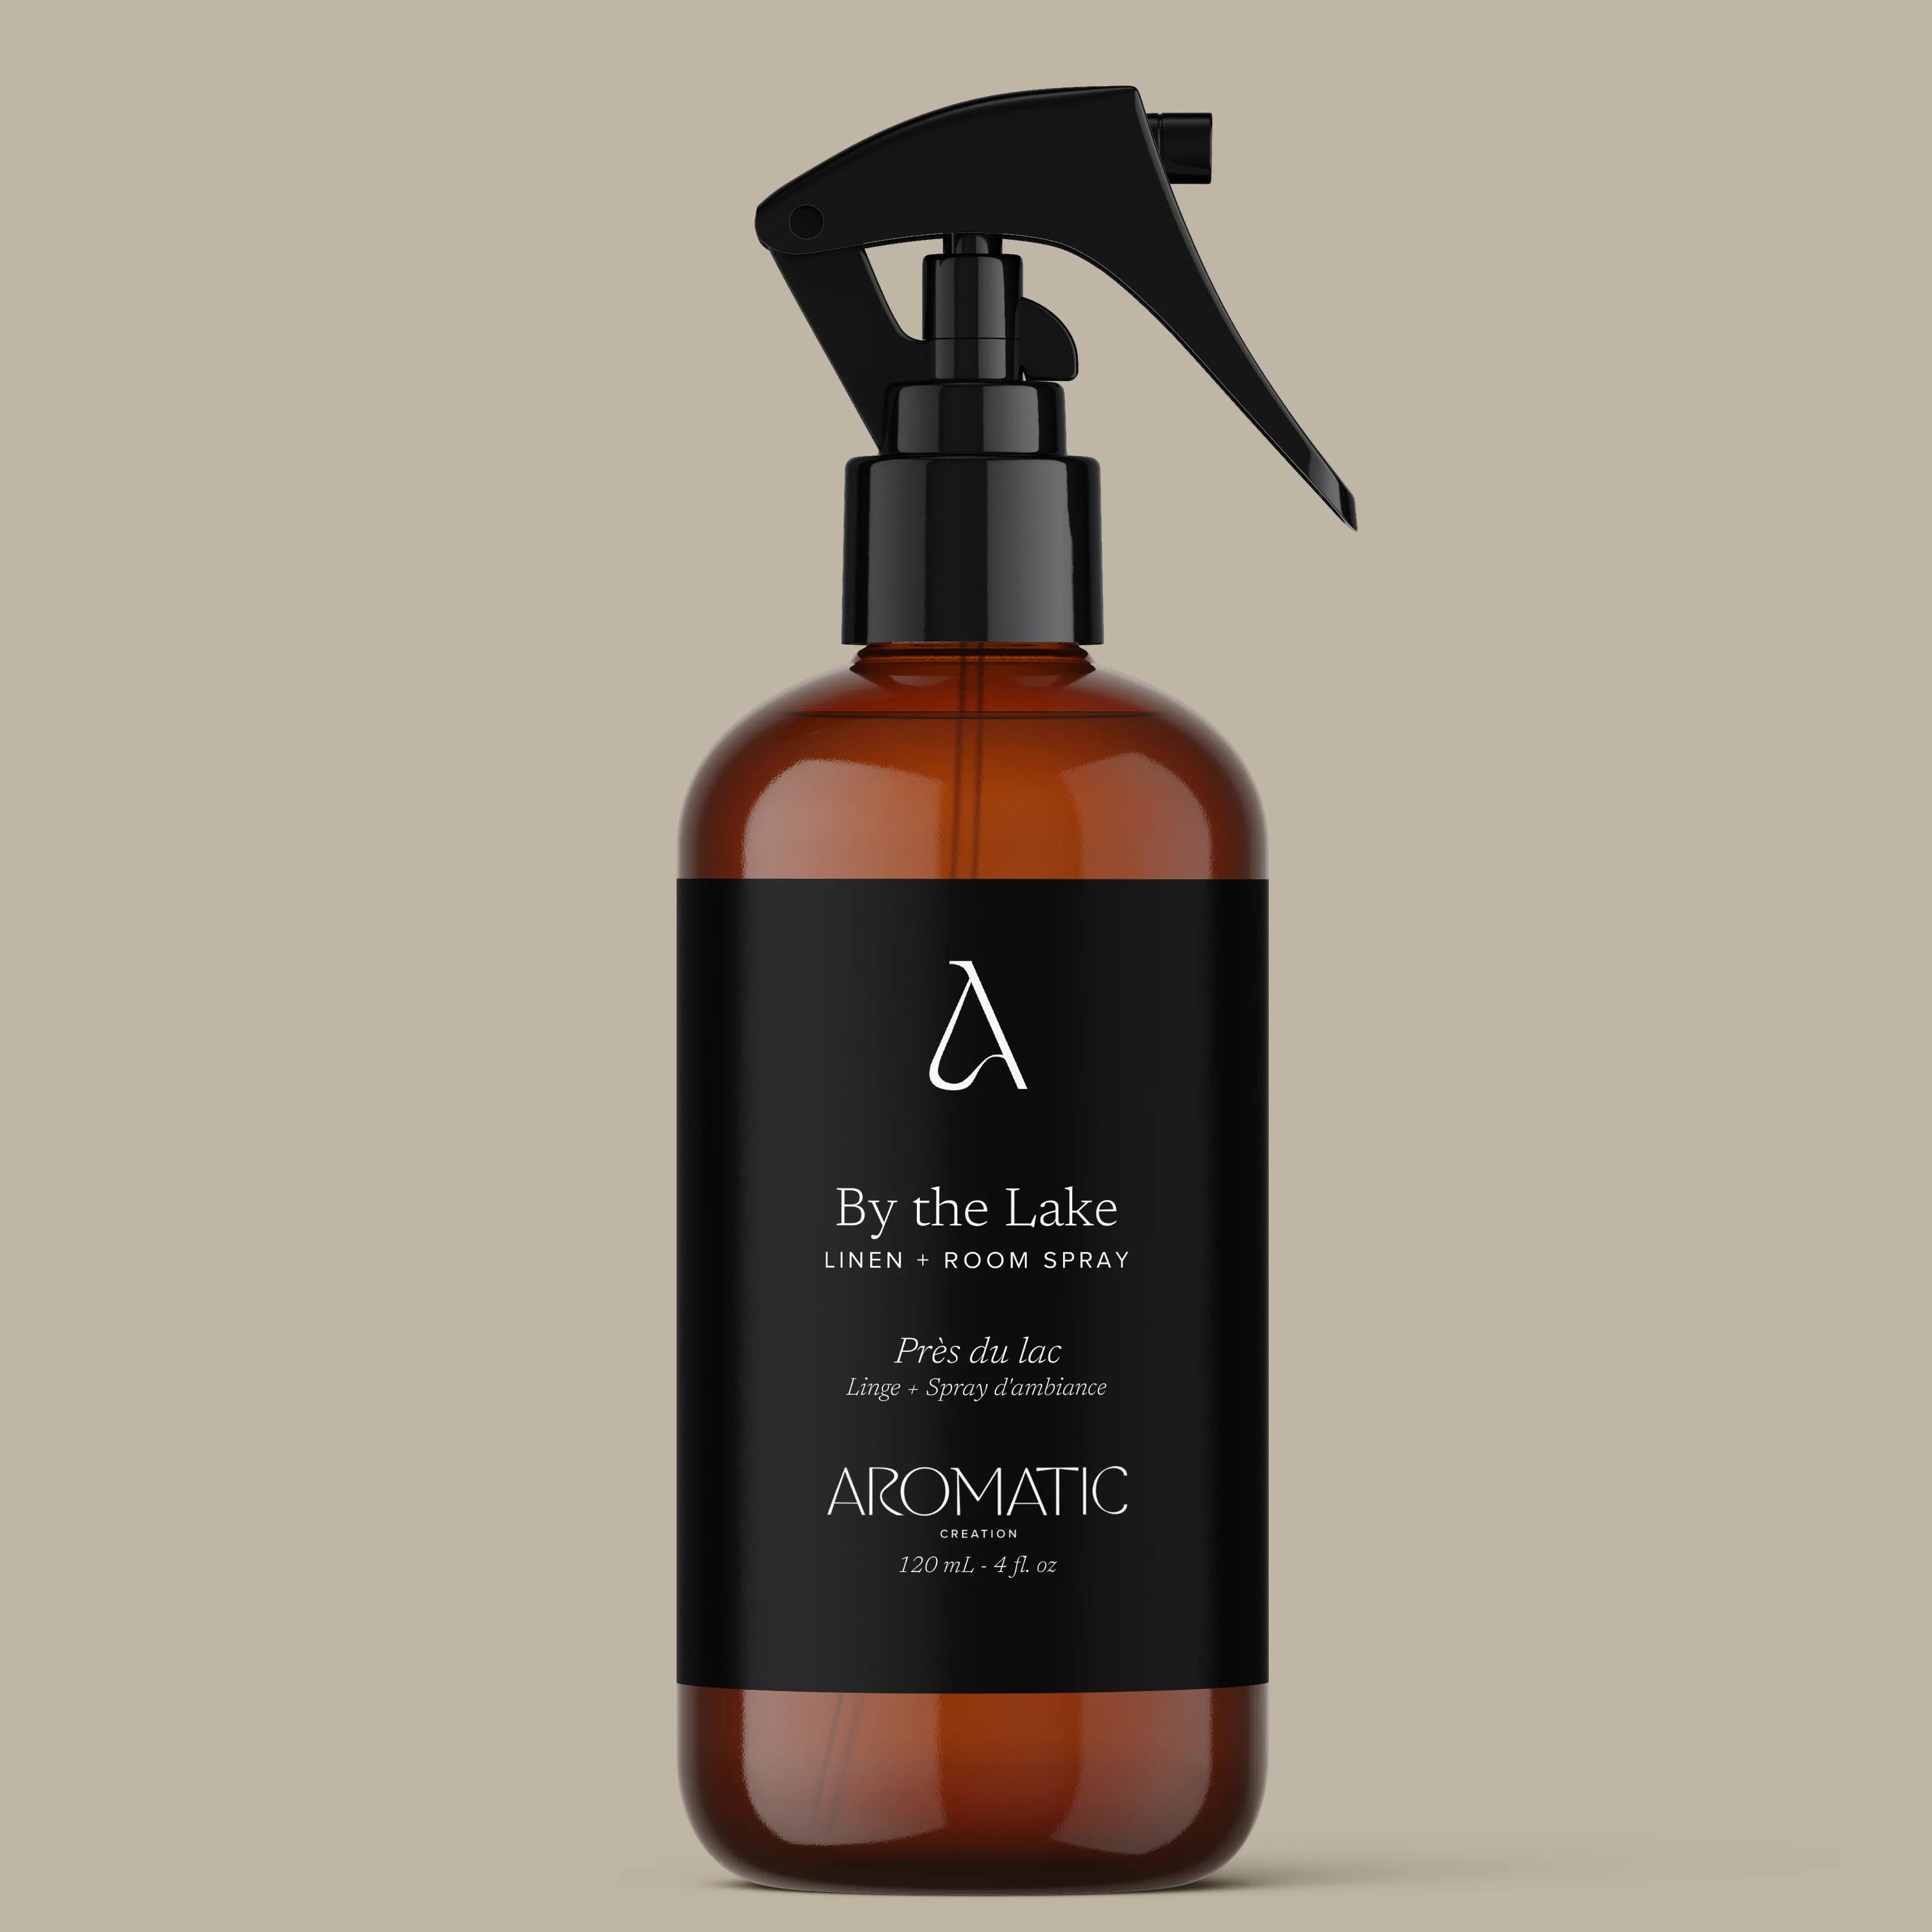 By the Lake Linen + Room Spray 120 mL